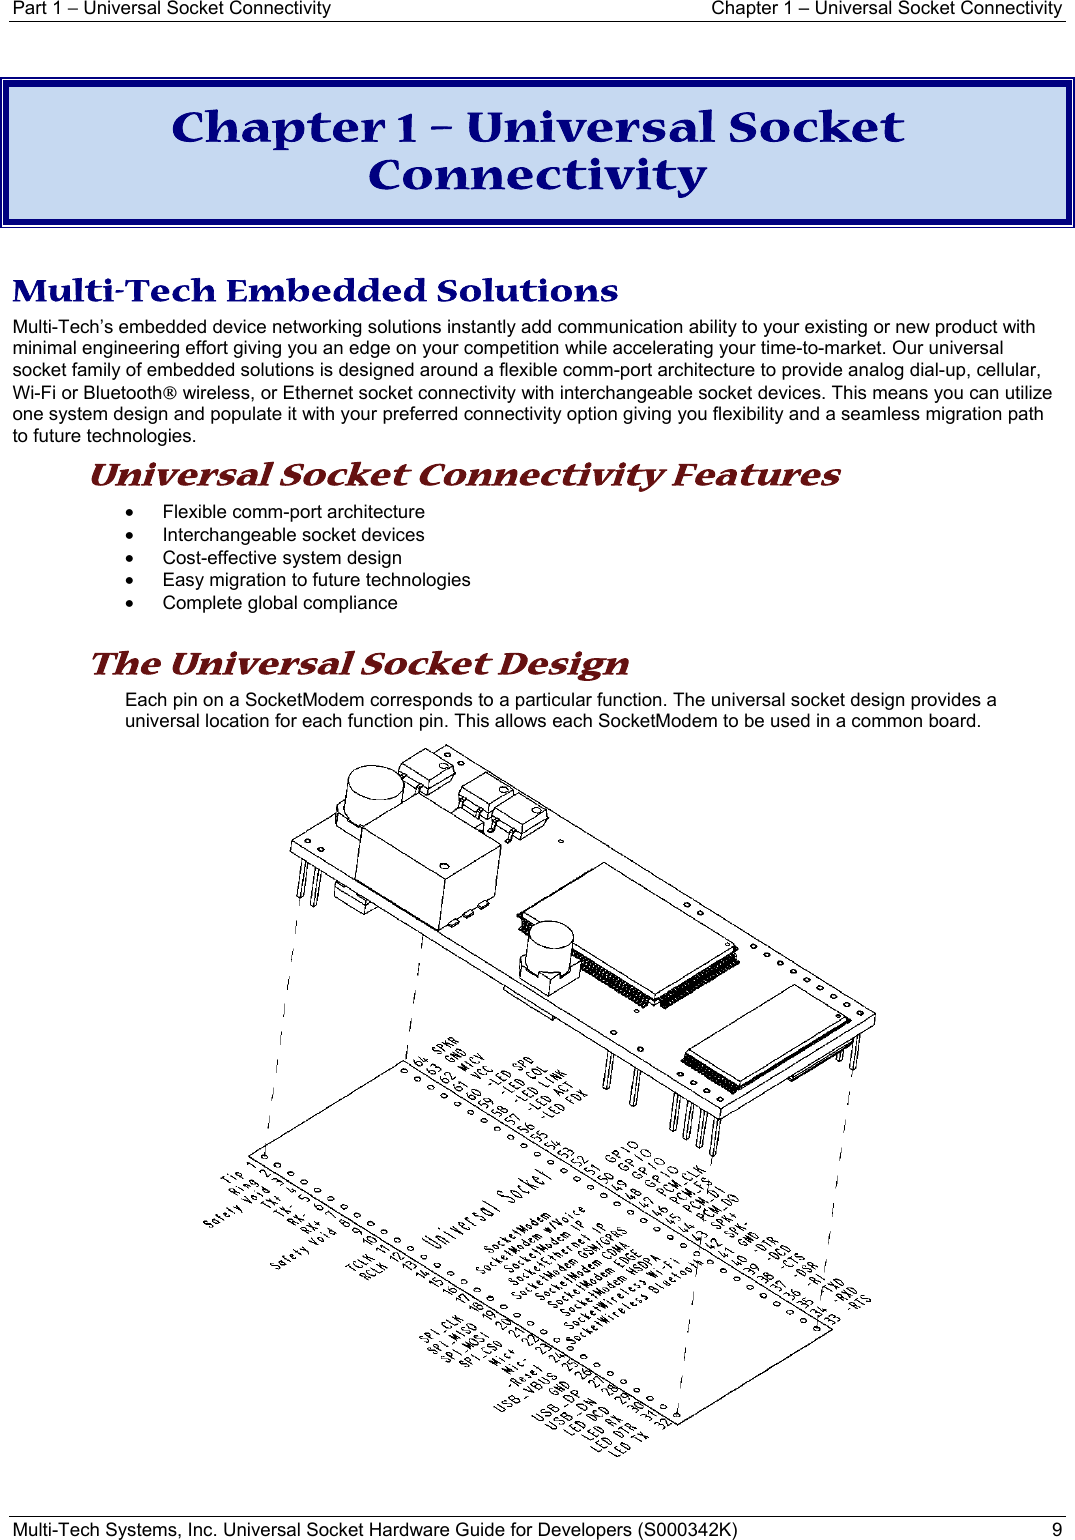 Part 1 − Universal Socket Connectivity    Chapter 1 – Universal Socket Connectivity Multi-Tech Systems, Inc. Universal Socket Hardware Guide for Developers (S000342K)  9   Chapter 1 – Universal Socket Connectivity  Multi-Tech Embedded Solutions Multi-Tech’s embedded device networking solutions instantly add communication ability to your existing or new product with minimal engineering effort giving you an edge on your competition while accelerating your time-to-market. Our universal socket family of embedded solutions is designed around a flexible comm-port architecture to provide analog dial-up, cellular, Wi-Fi or Bluetooth® wireless, or Ethernet socket connectivity with interchangeable socket devices. This means you can utilize one system design and populate it with your preferred connectivity option giving you flexibility and a seamless migration path to future technologies.  Universal Socket Connectivity Features •  Flexible comm-port architecture  •  Interchangeable socket devices • Cost-effective system design •  Easy migration to future technologies •  Complete global compliance  The Universal Socket Design  Each pin on a SocketModem corresponds to a particular function. The universal socket design provides a universal location for each function pin. This allows each SocketModem to be used in a common board.   